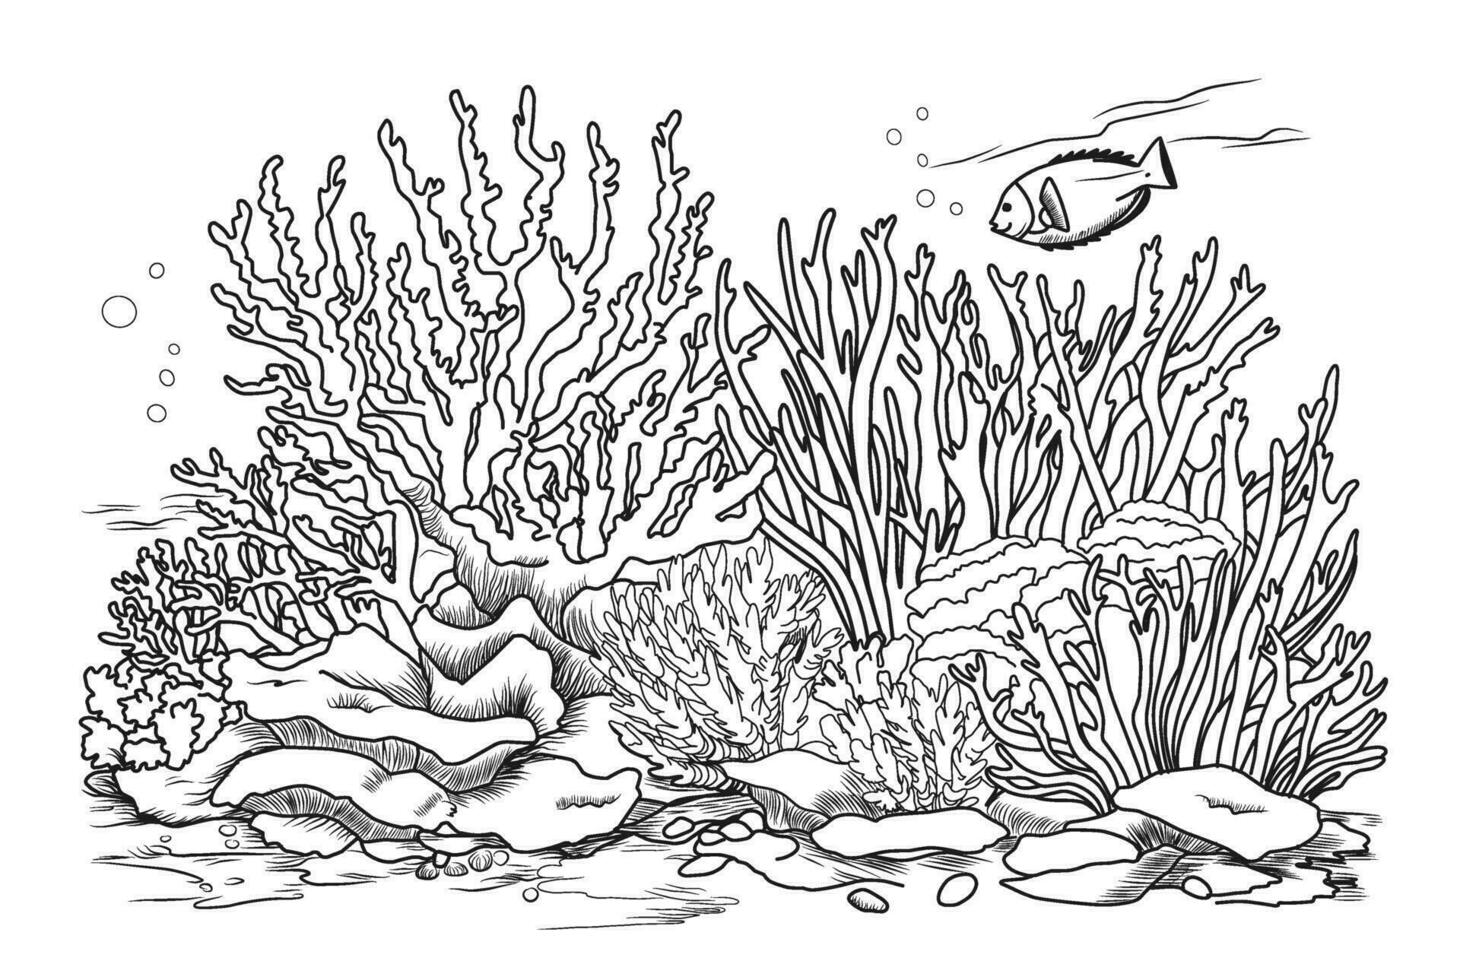 Underwater world coloring page. Coloring page life in the ocean with algae. vector